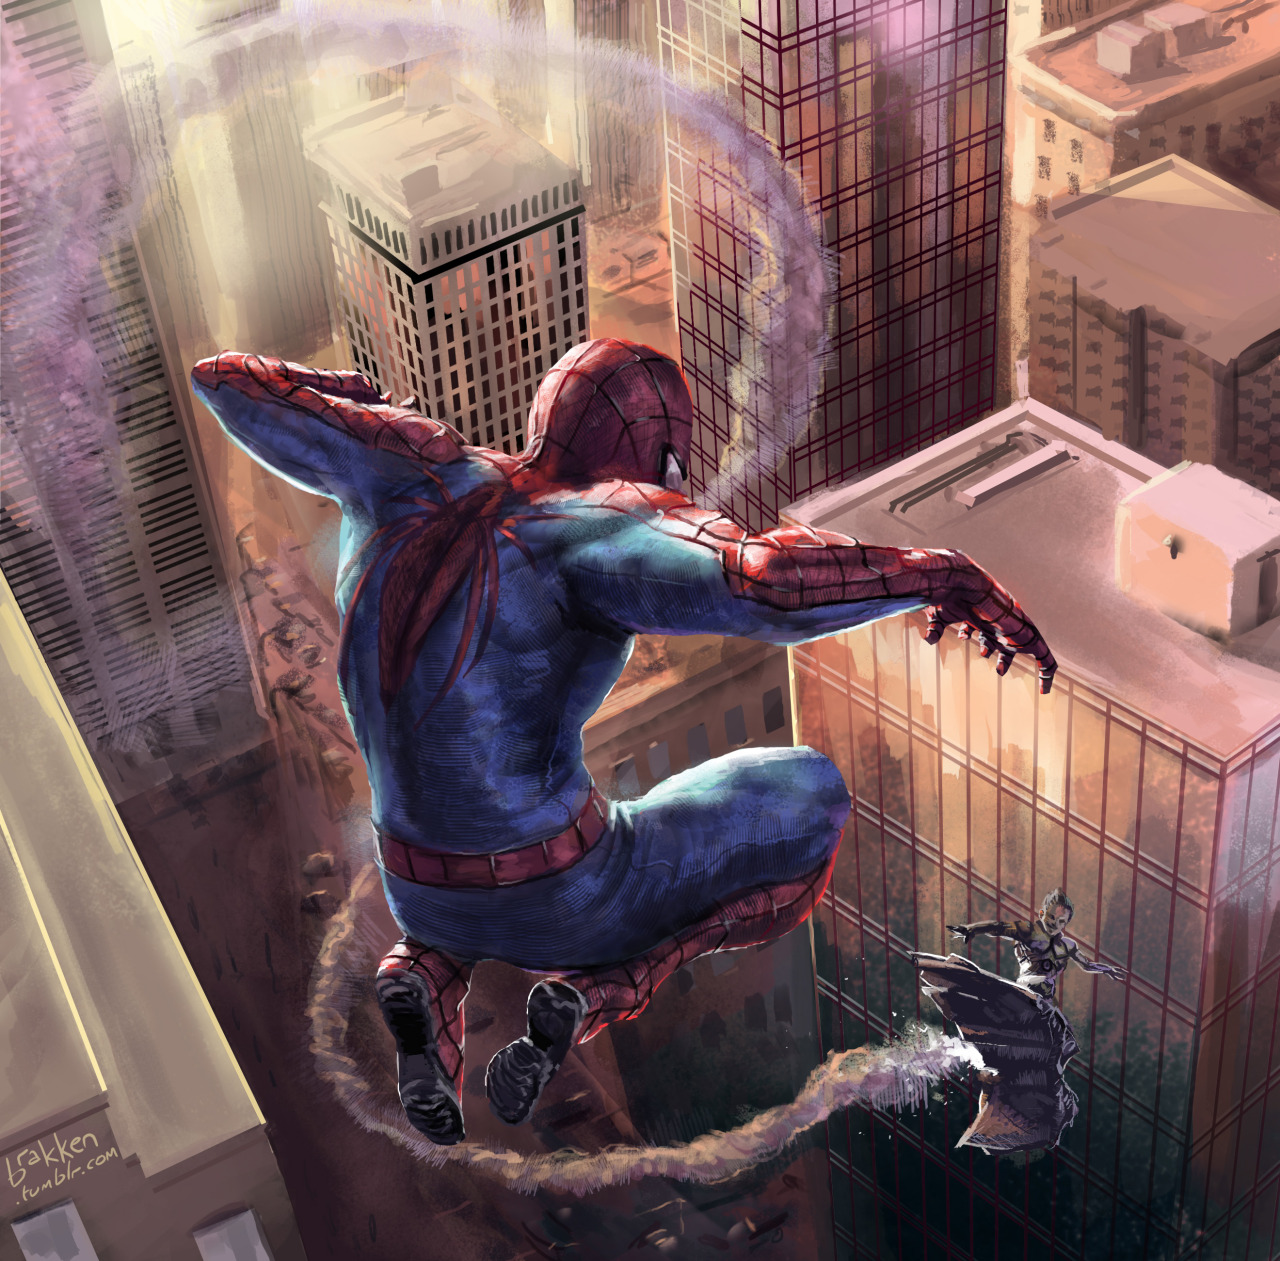 Pursuit through the city.
Let’s see Amazing Spidey 2 together! Just you and me.